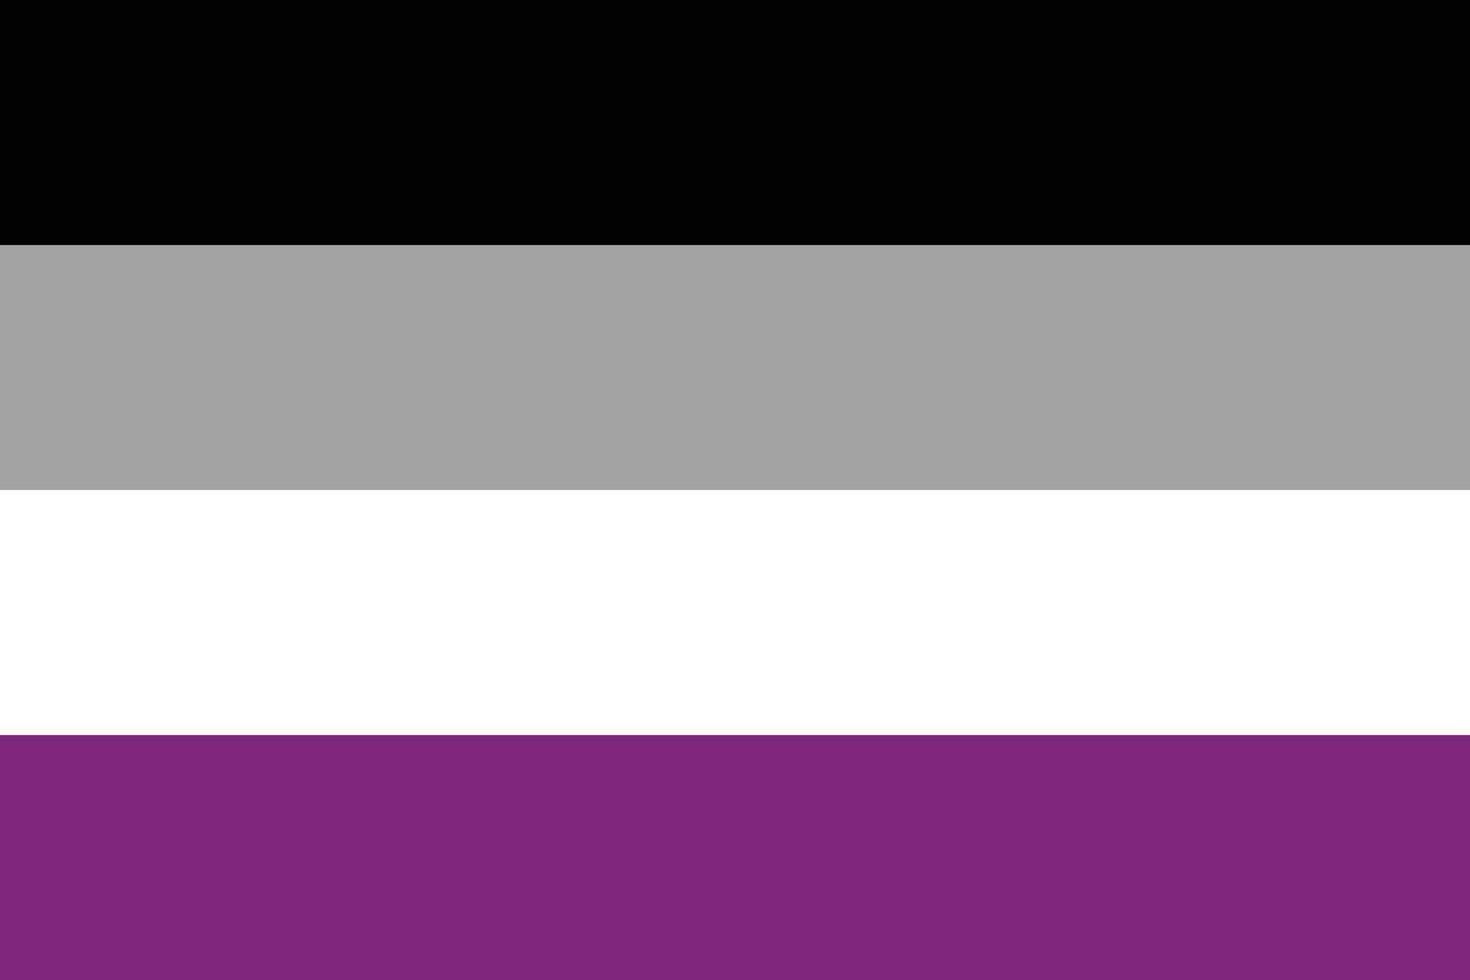 asexuell Stolz Flagge. International asexuell Stolz Flagge vektor